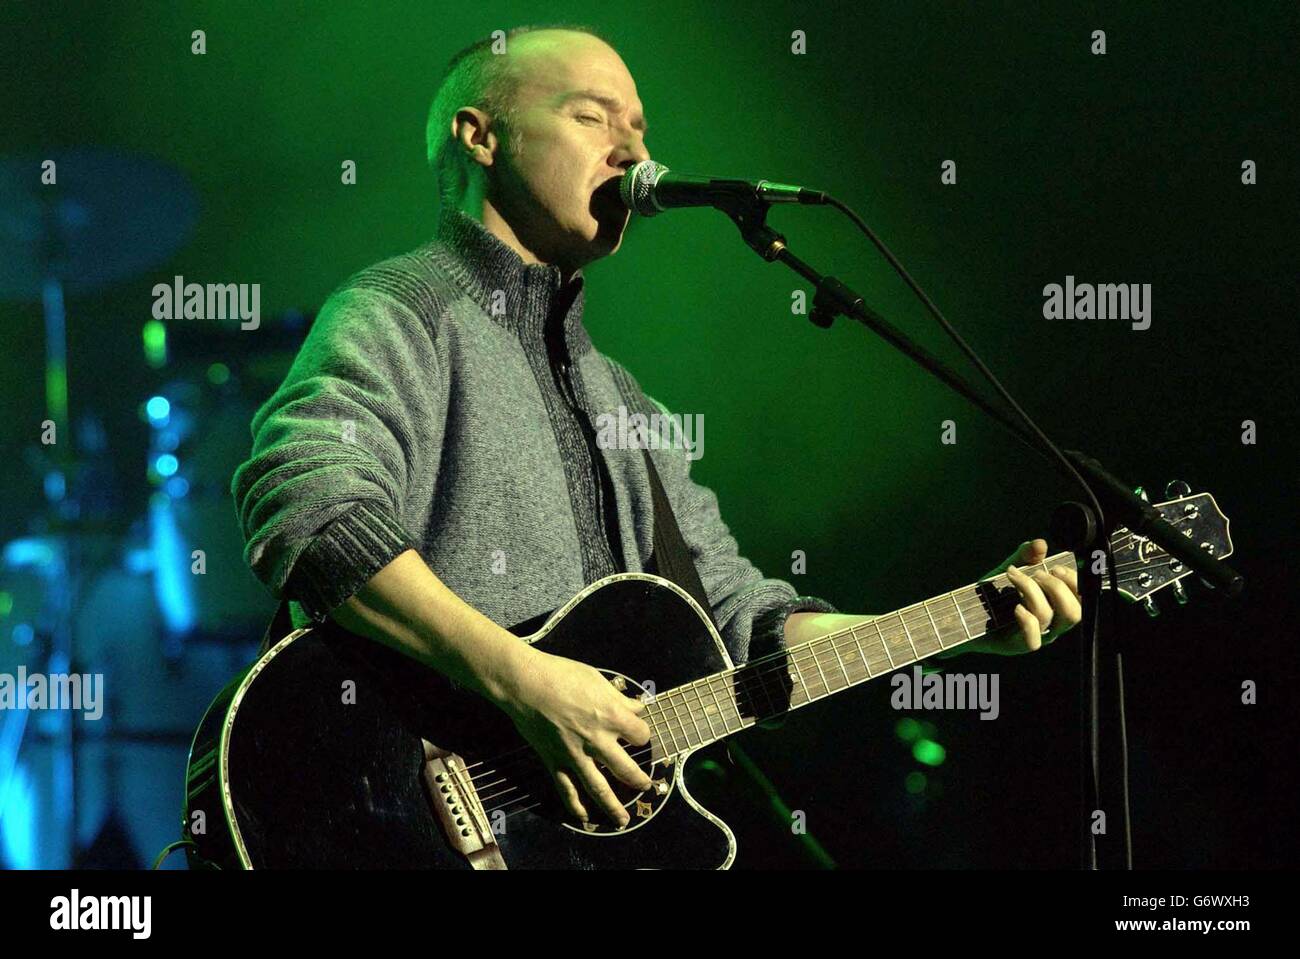 Midge Ure performing onstage during the Ronnie Lane tribute concert, held at the Royal Albert Hall, central London. Founder member of Small Faces, Ronnie Lane, died in 1997, aged 51, after a protracted battle with muscular sclerosis. Stock Photo